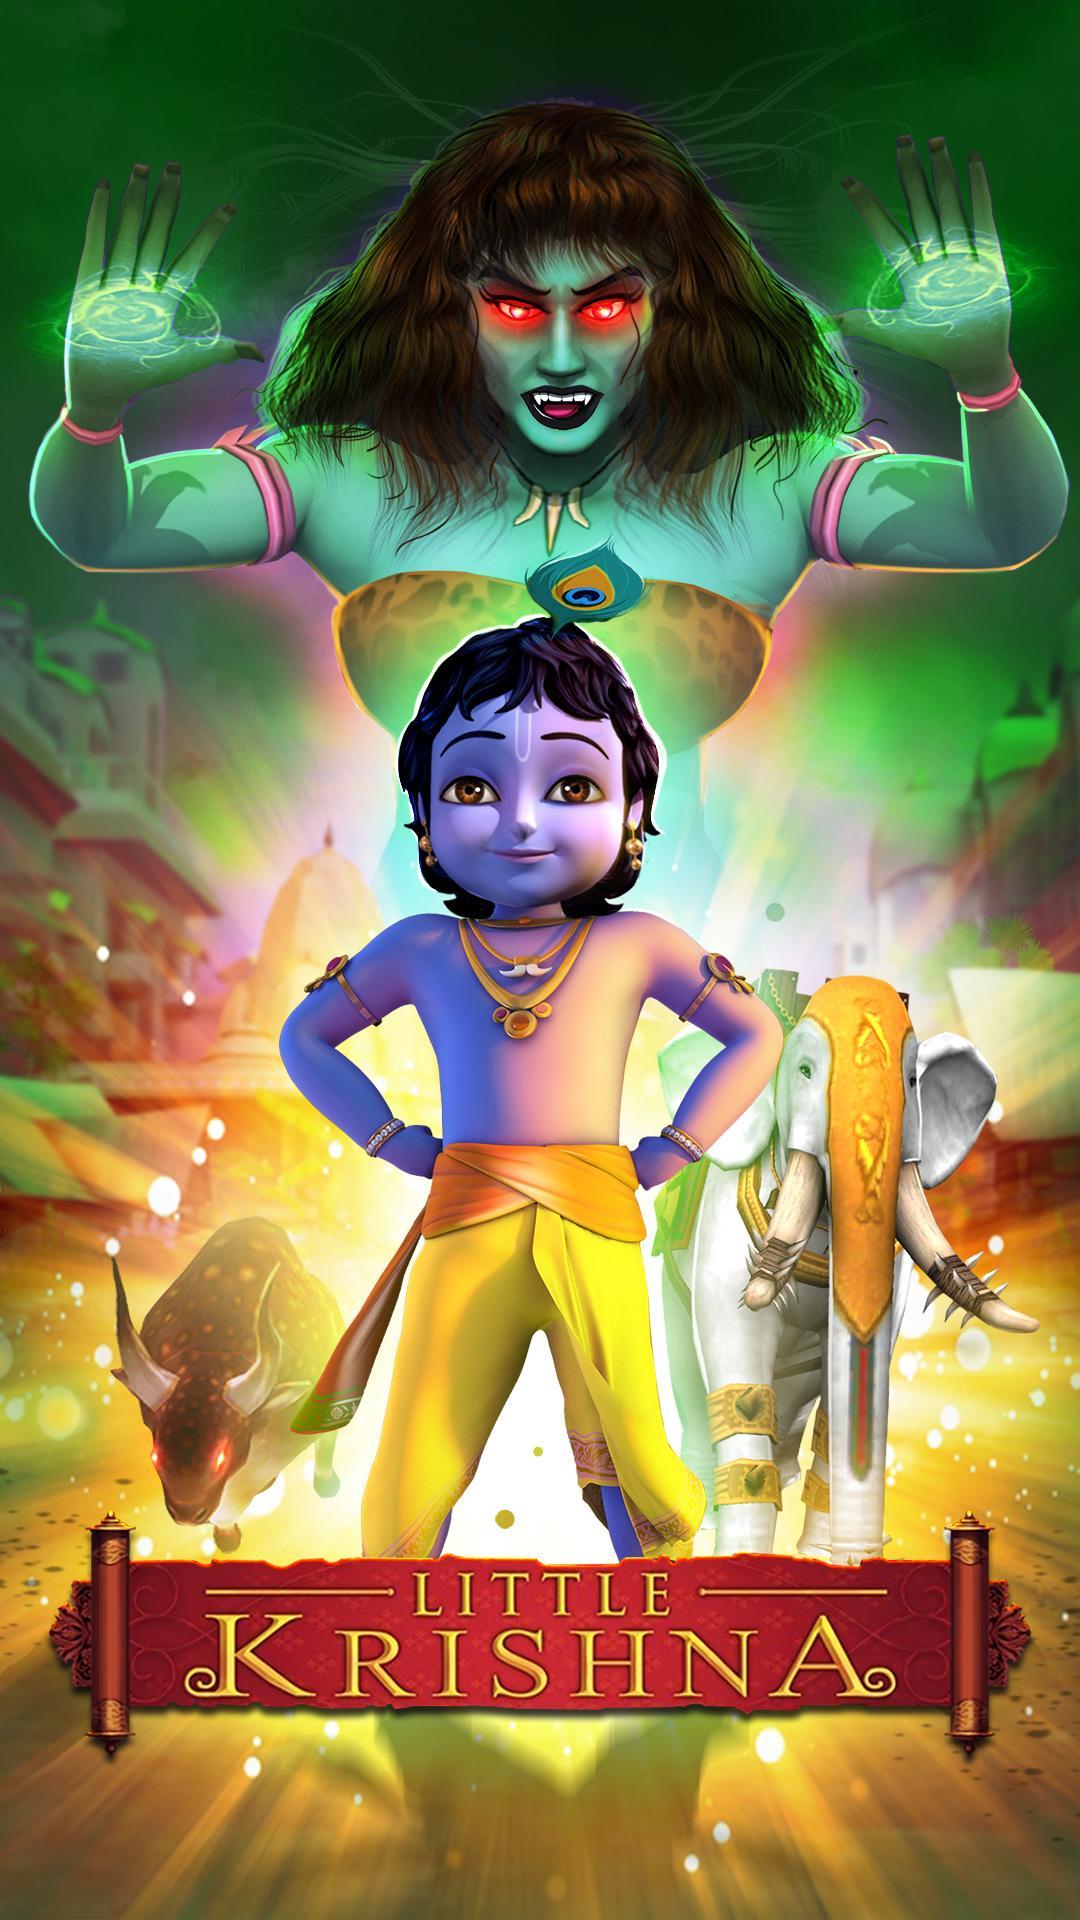 Little Krishna for Android - APK Download